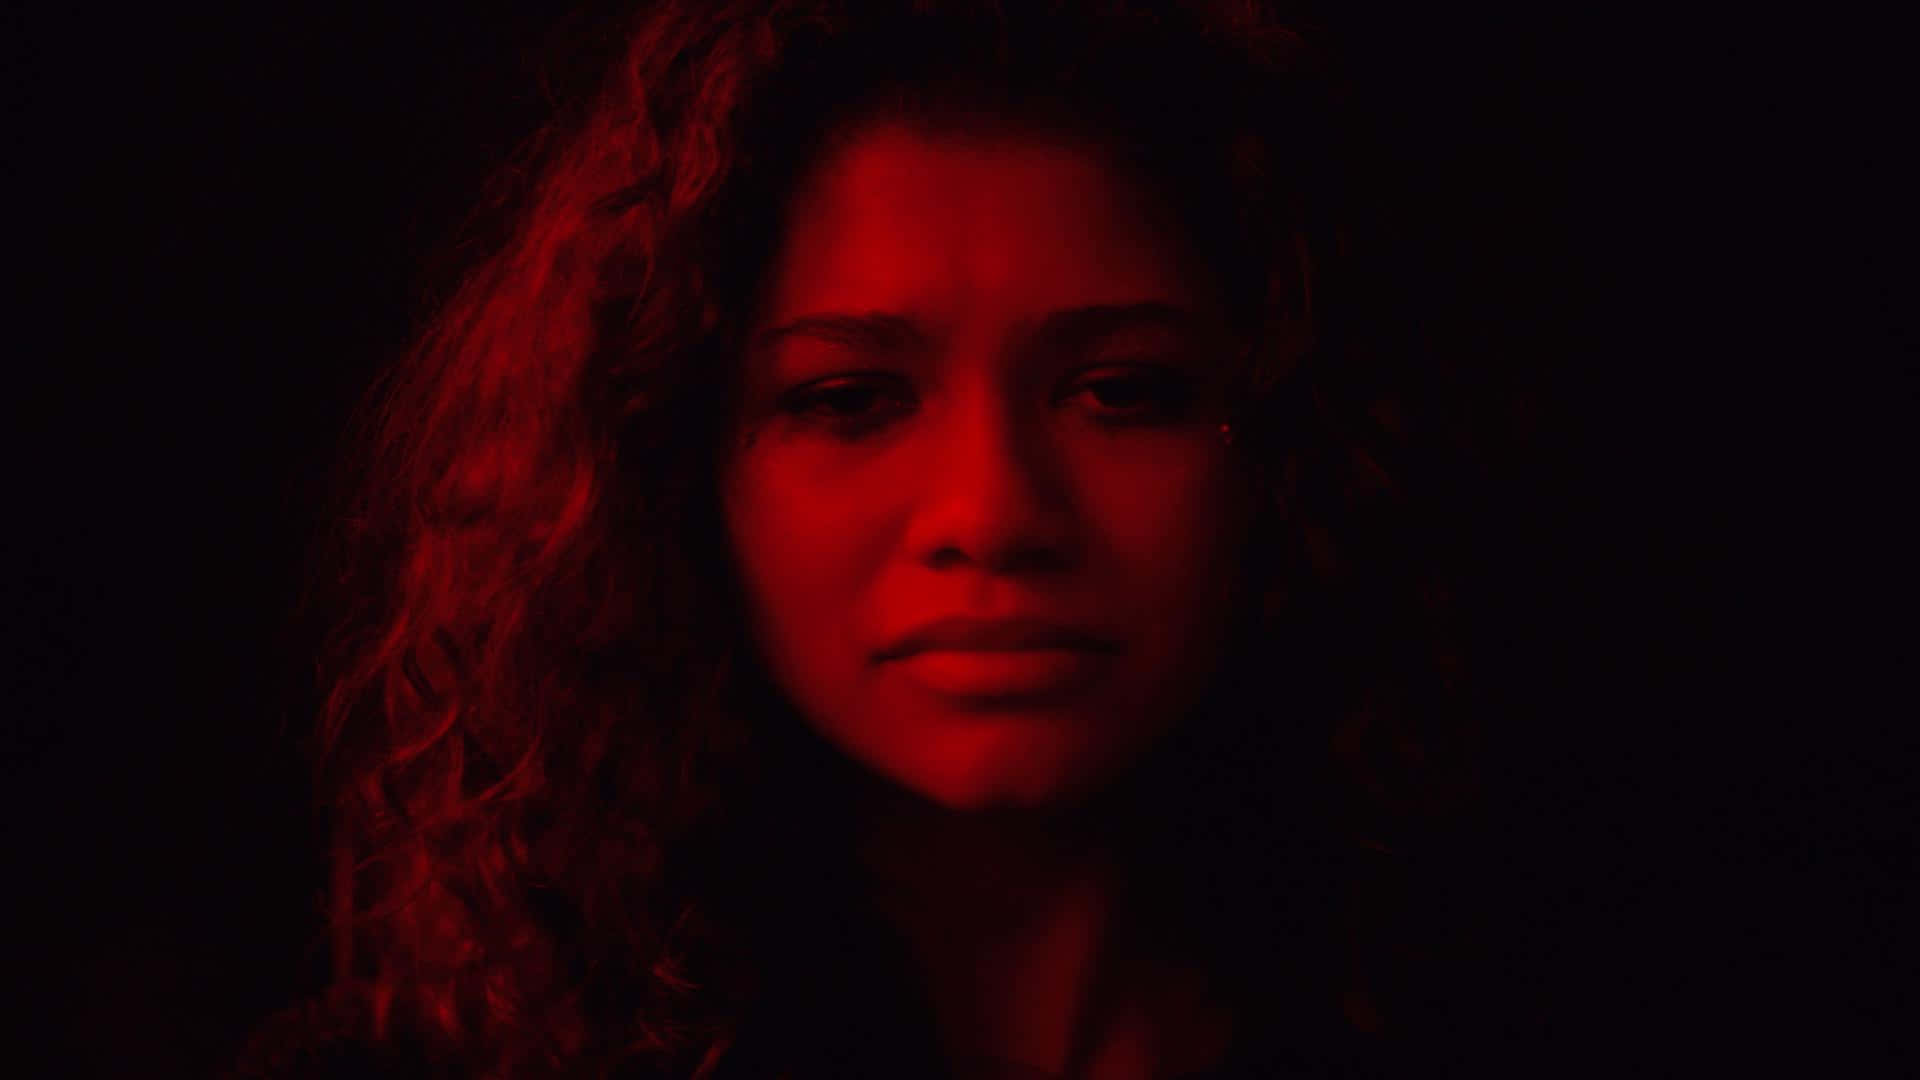 A Woman With Curly Hair In A Dark Room